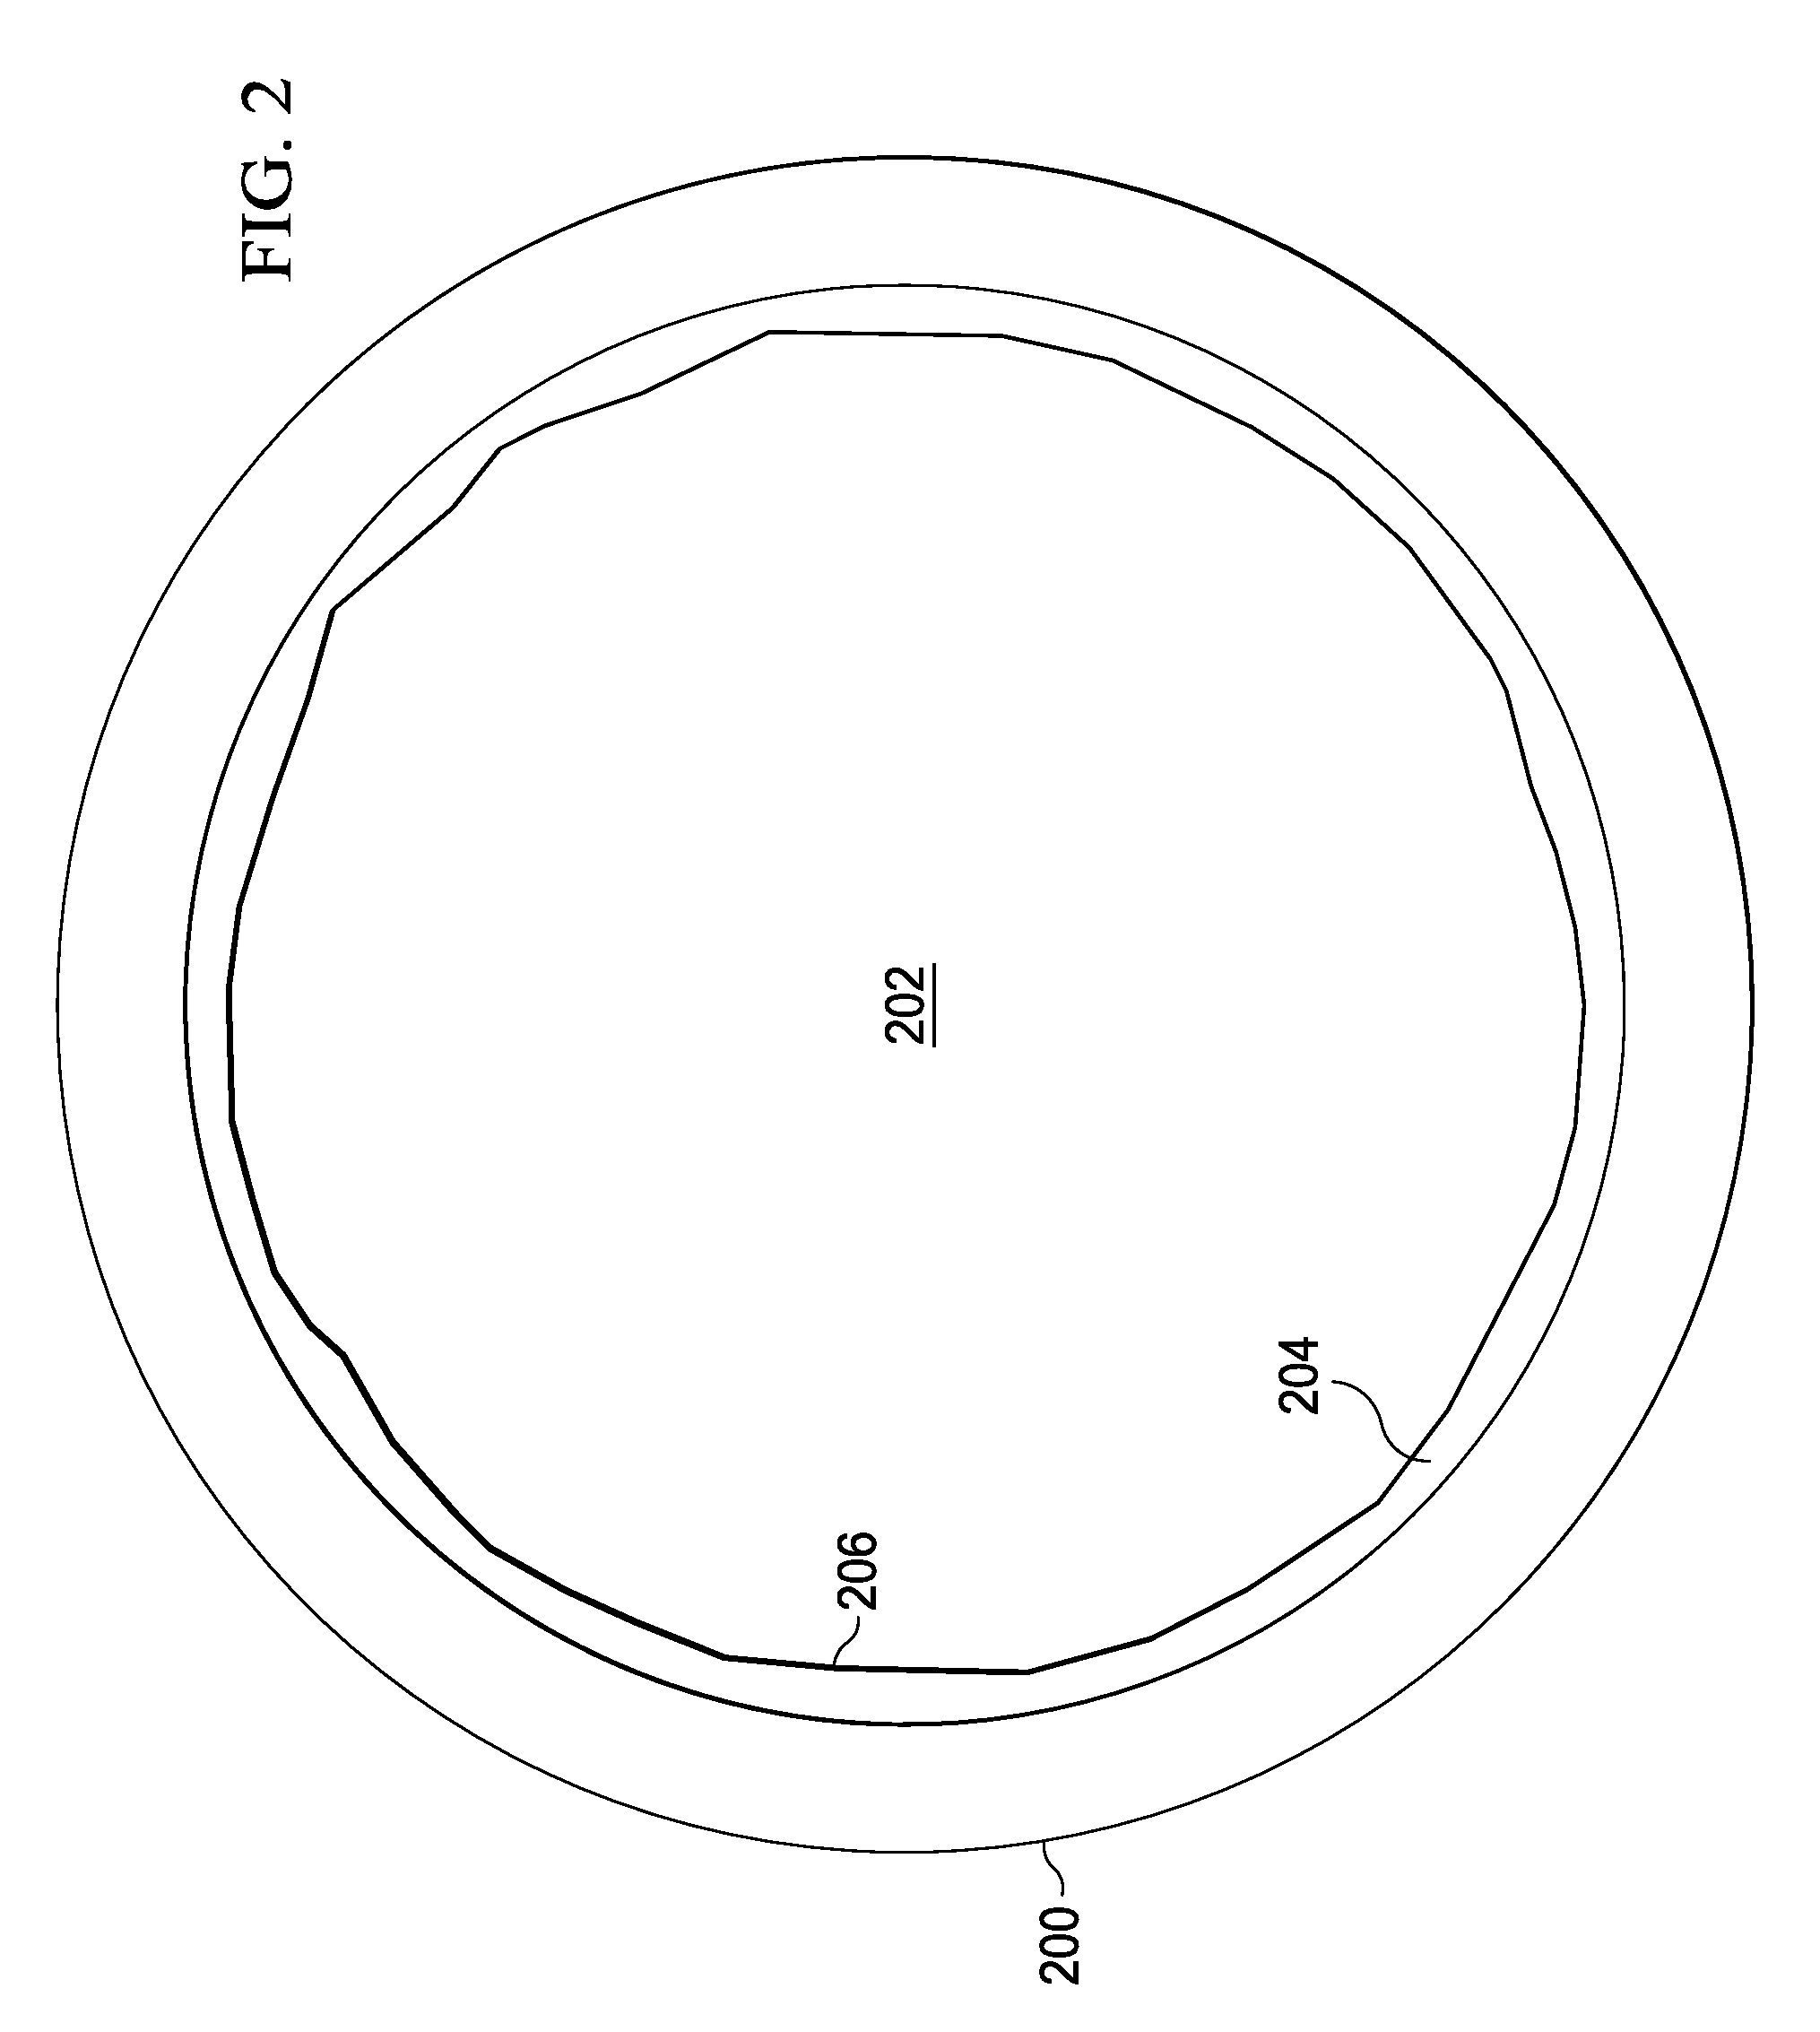 Reduced-pressure system and method employing a gasket